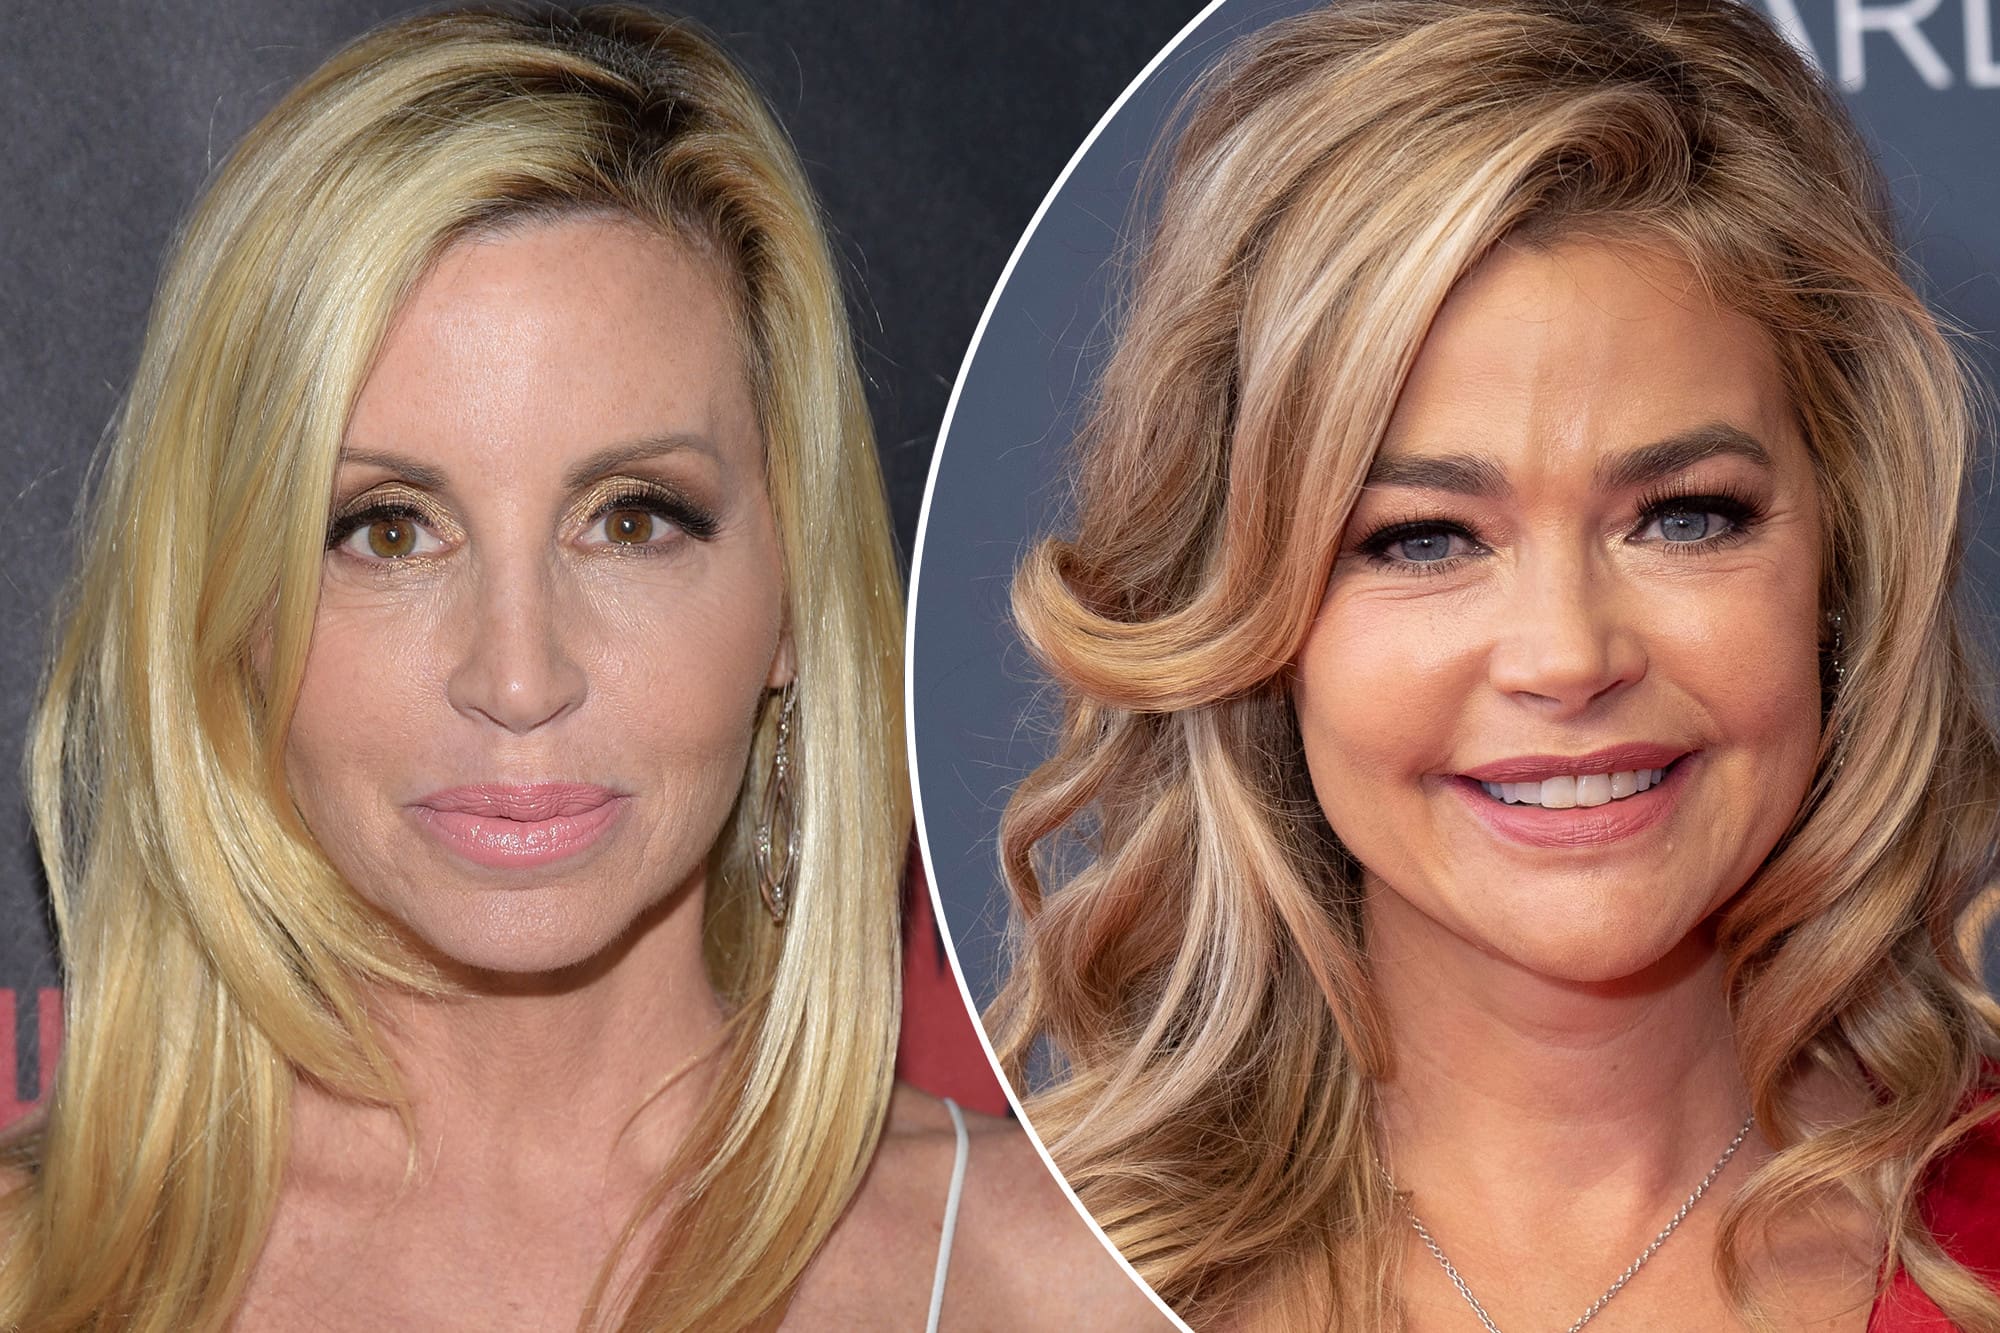 ”camille-grammer-drags-hypocrite-denise-richards-after-comment-about-her-looking-high”